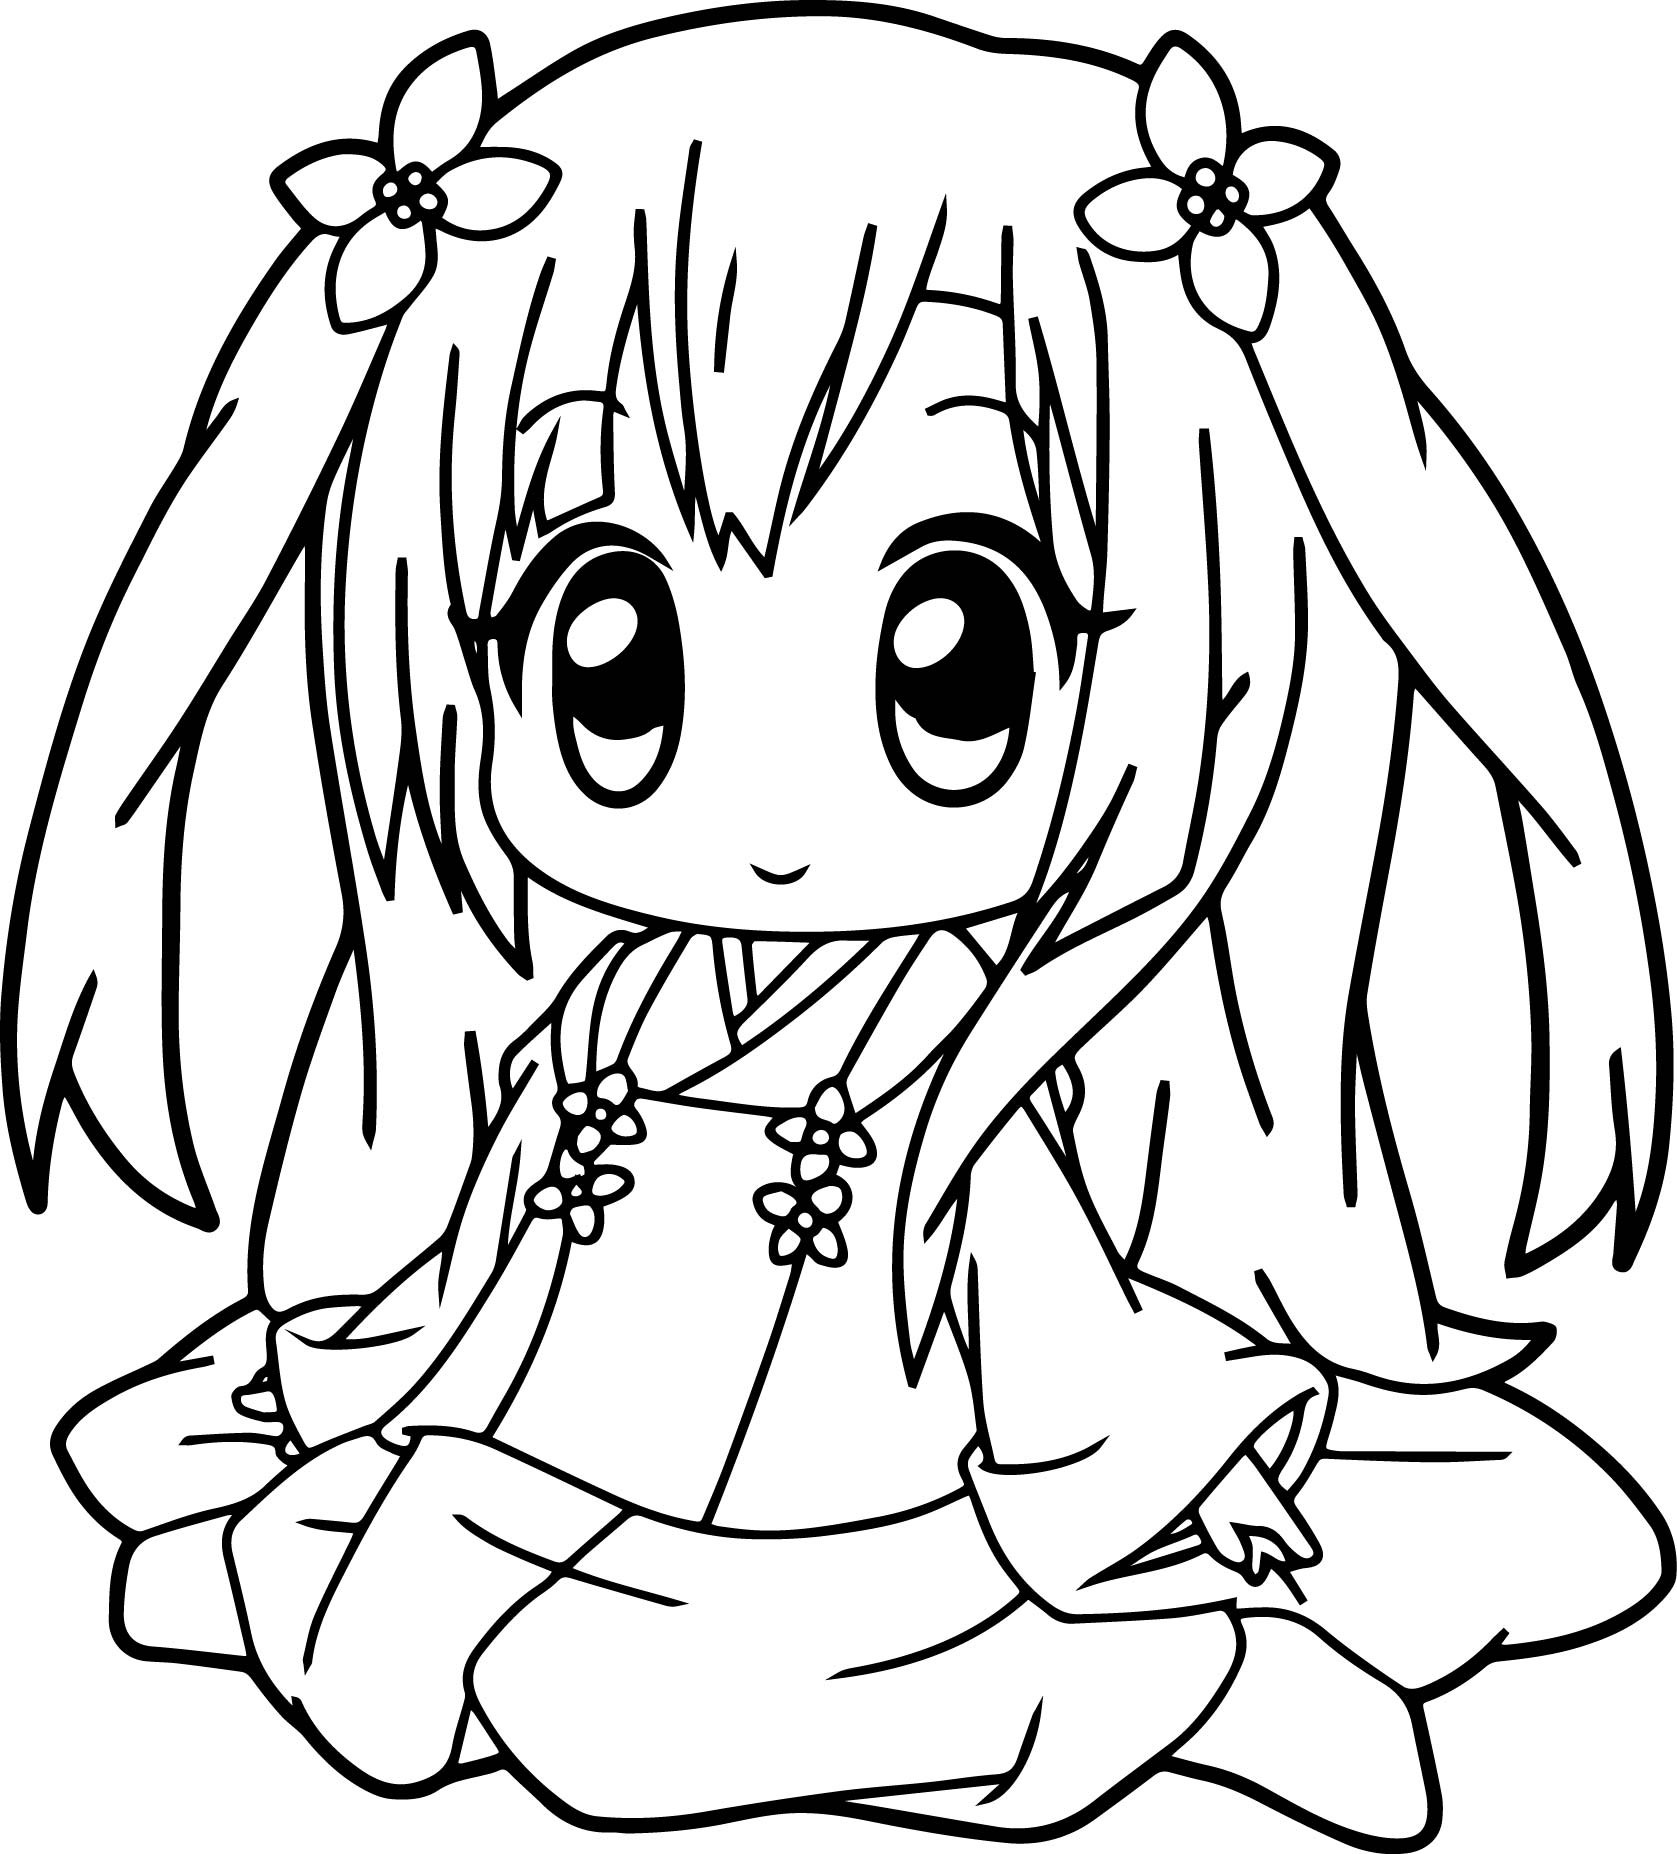 Girl Cartoon Coloring Pages
 cartoon girl coloring pages